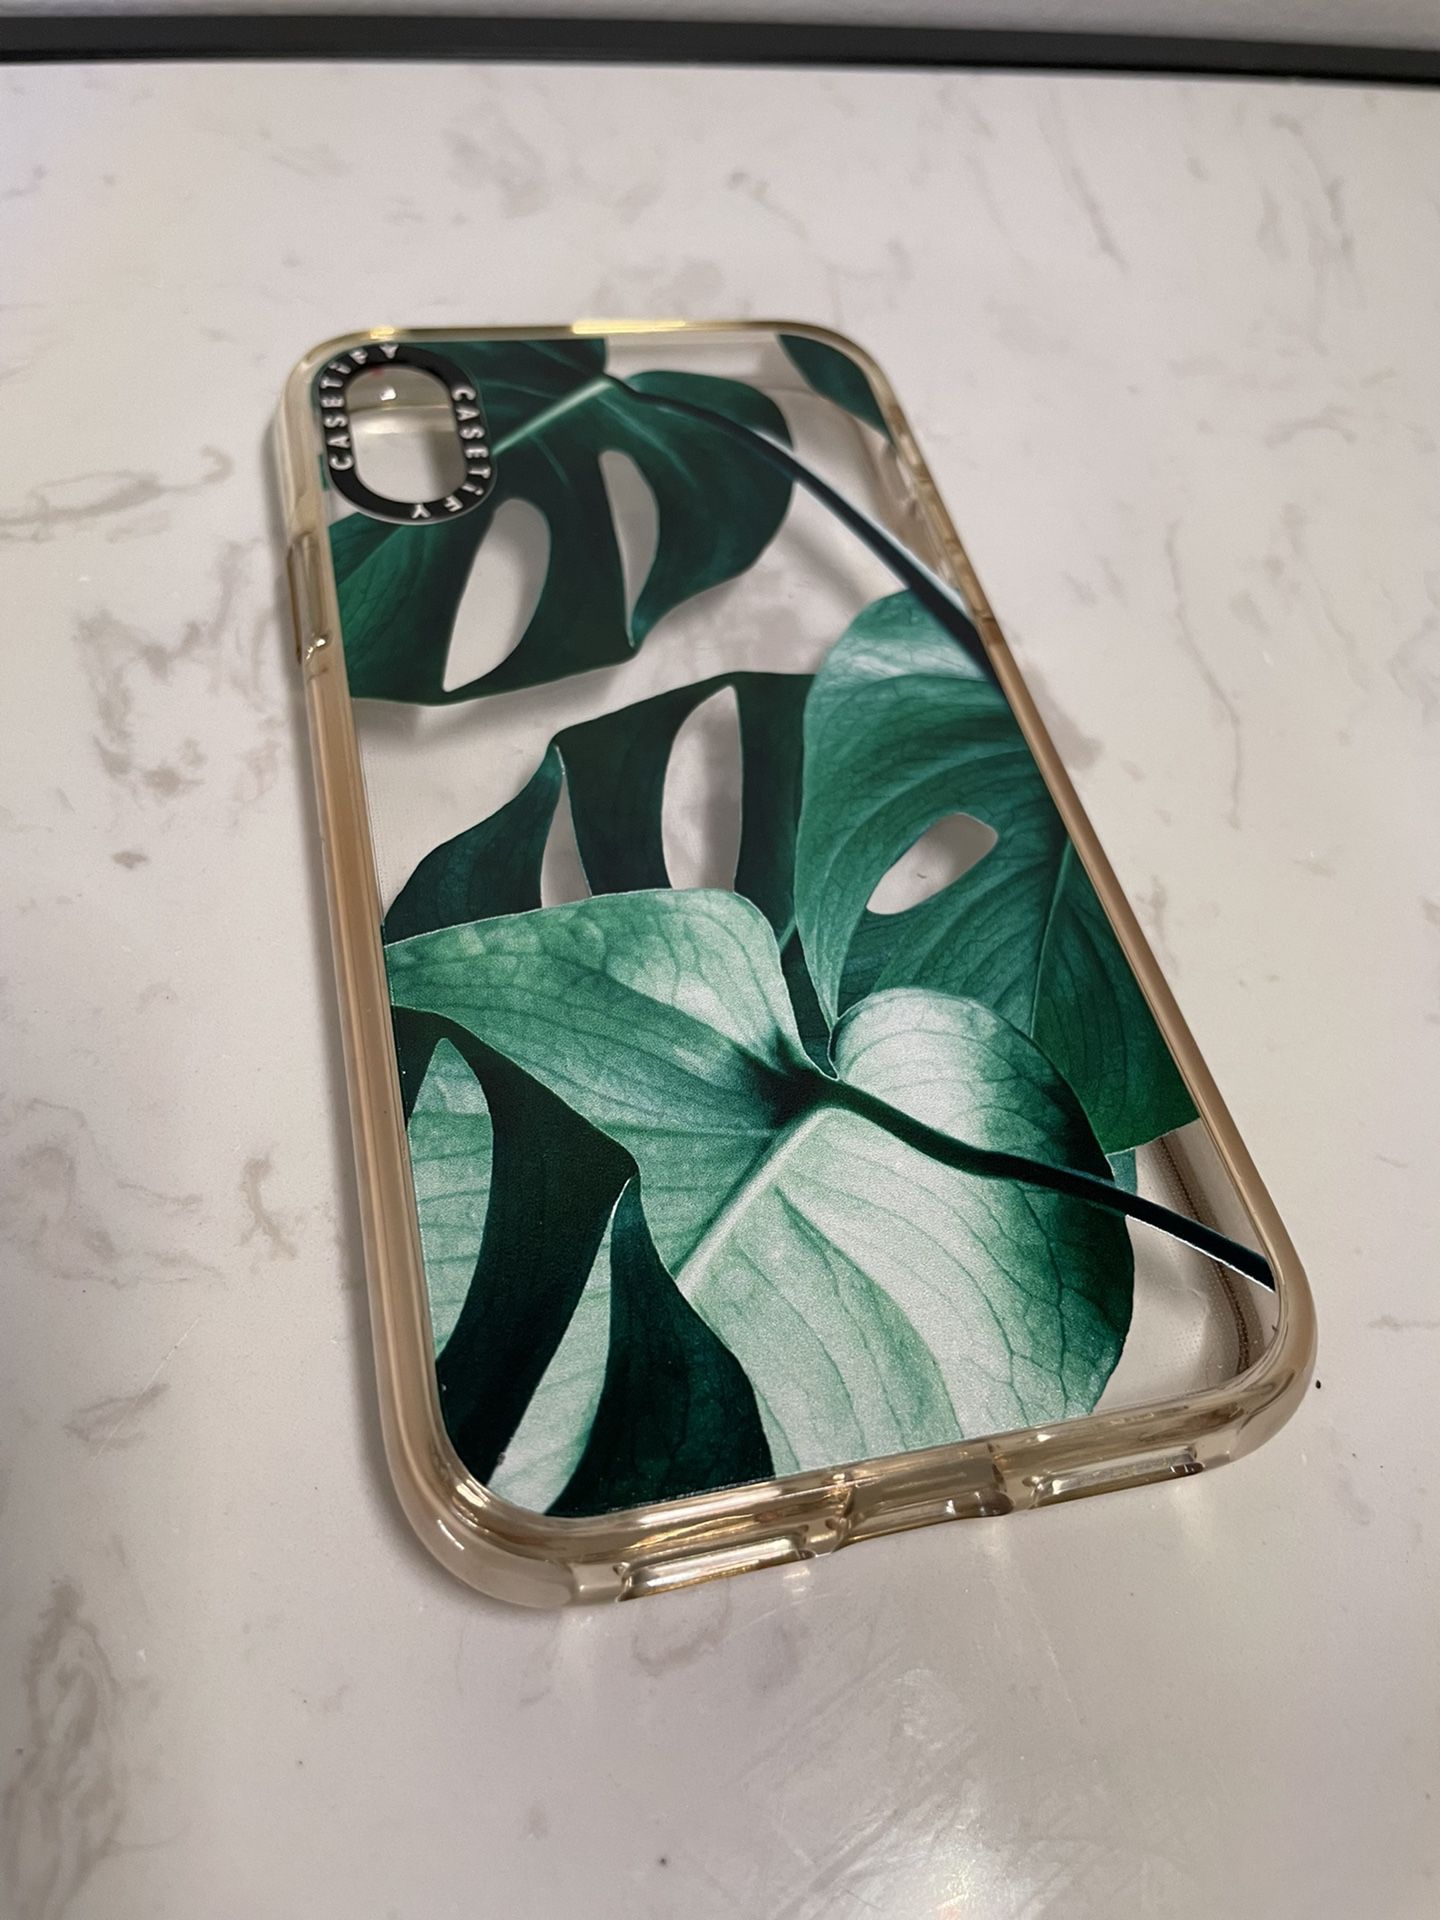 IPhone XR cases - See Description For More 